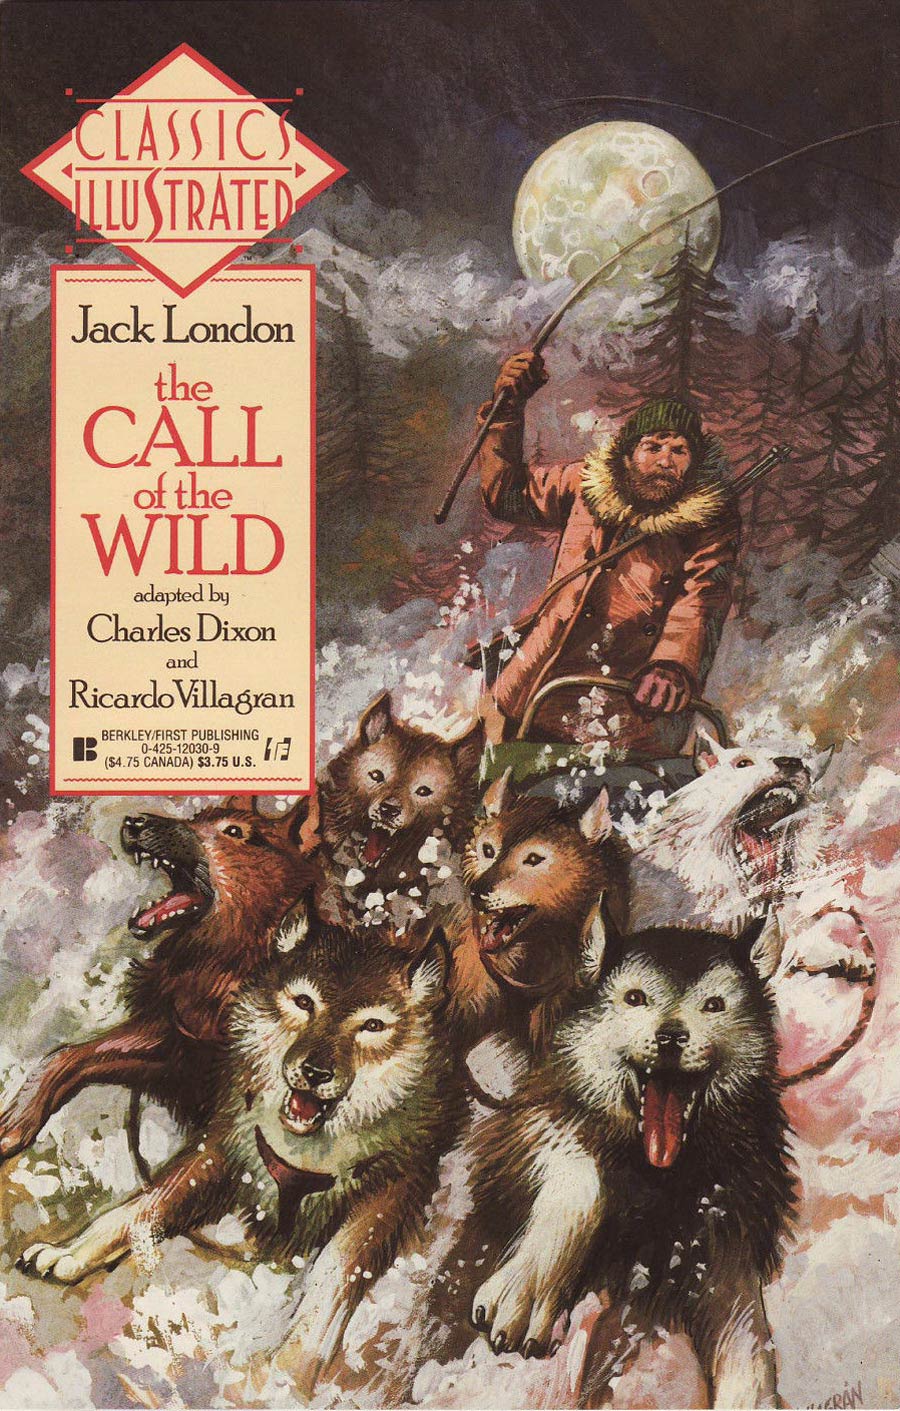 Classics Illustrated Vol 2 #10 The Call Of The Wild